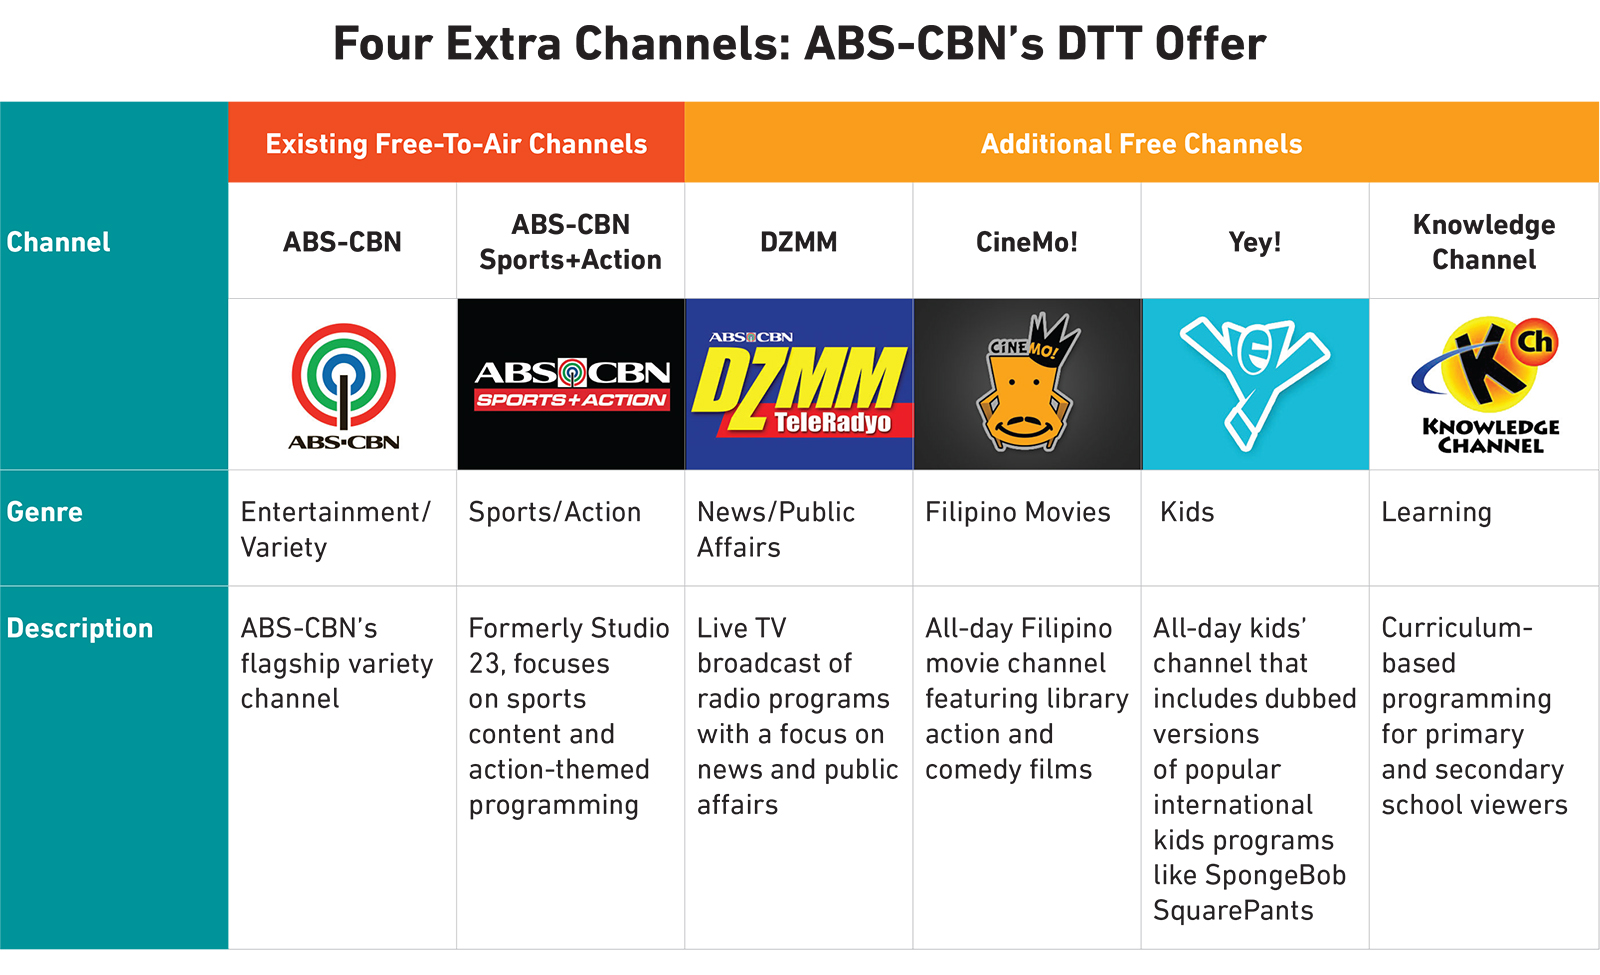 Abs Cbn Revs Up New Growth Engines Mpa Views Media Partners Asia